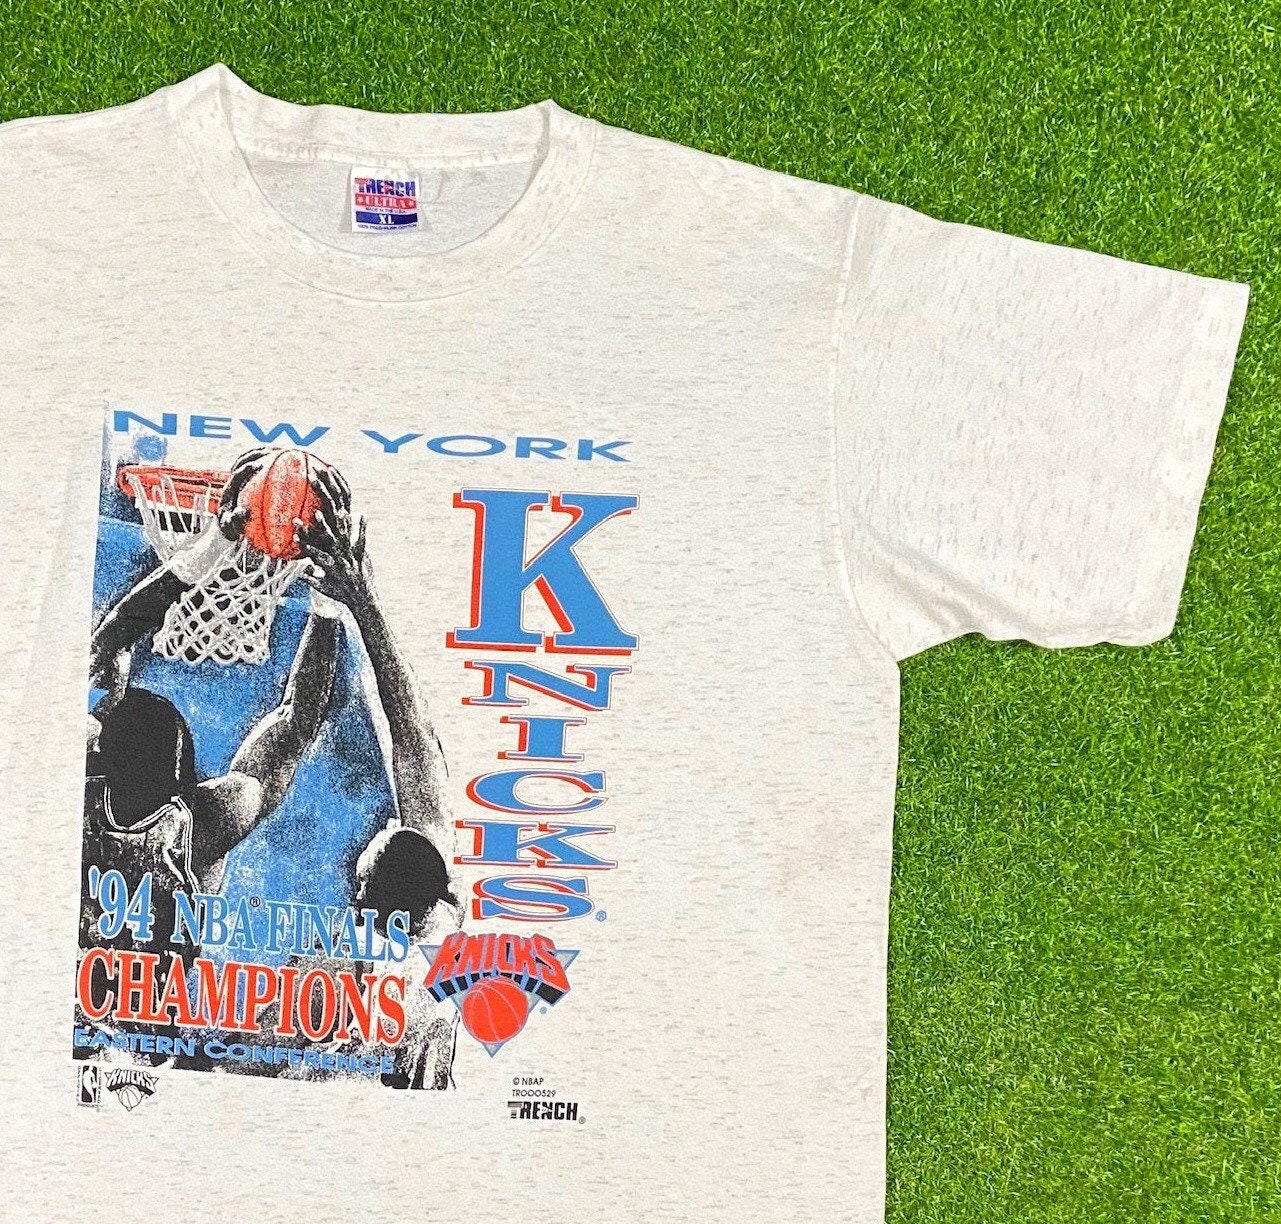 LegacyVintage99 Vintage New York Knicks T Shirt Eastern Conference Champs 1994 90s Striped Trench Made USA Tee Deadstock New with Tags Brand New NBA